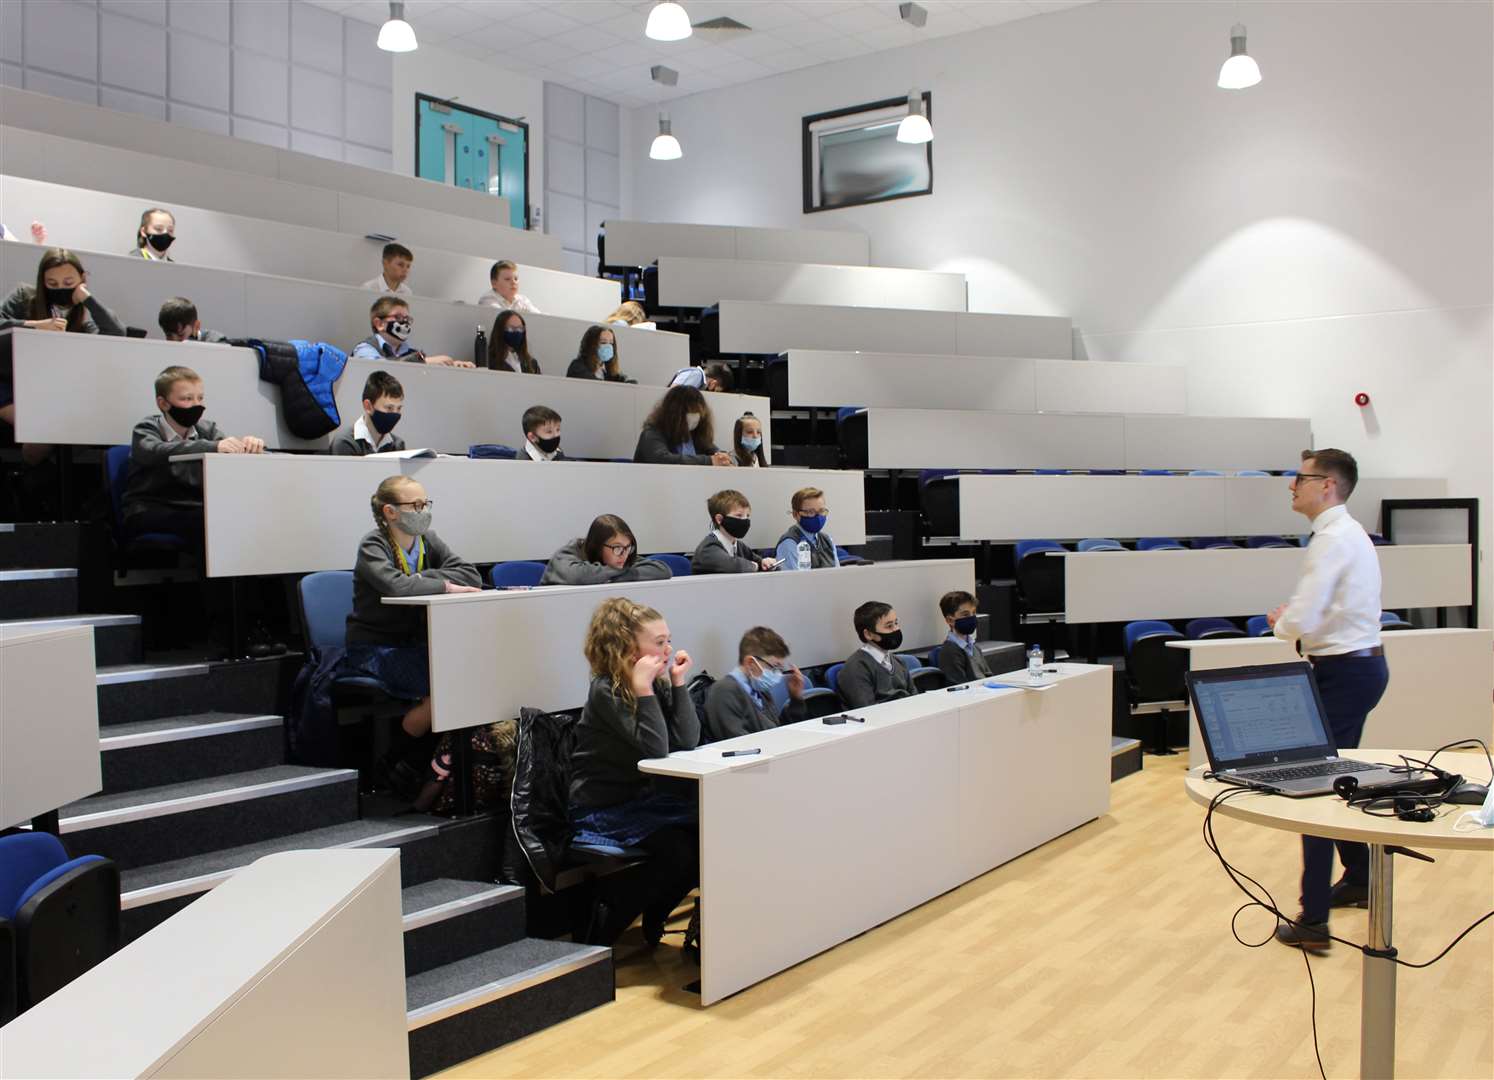 The new lecture style classroom at Turner Free School